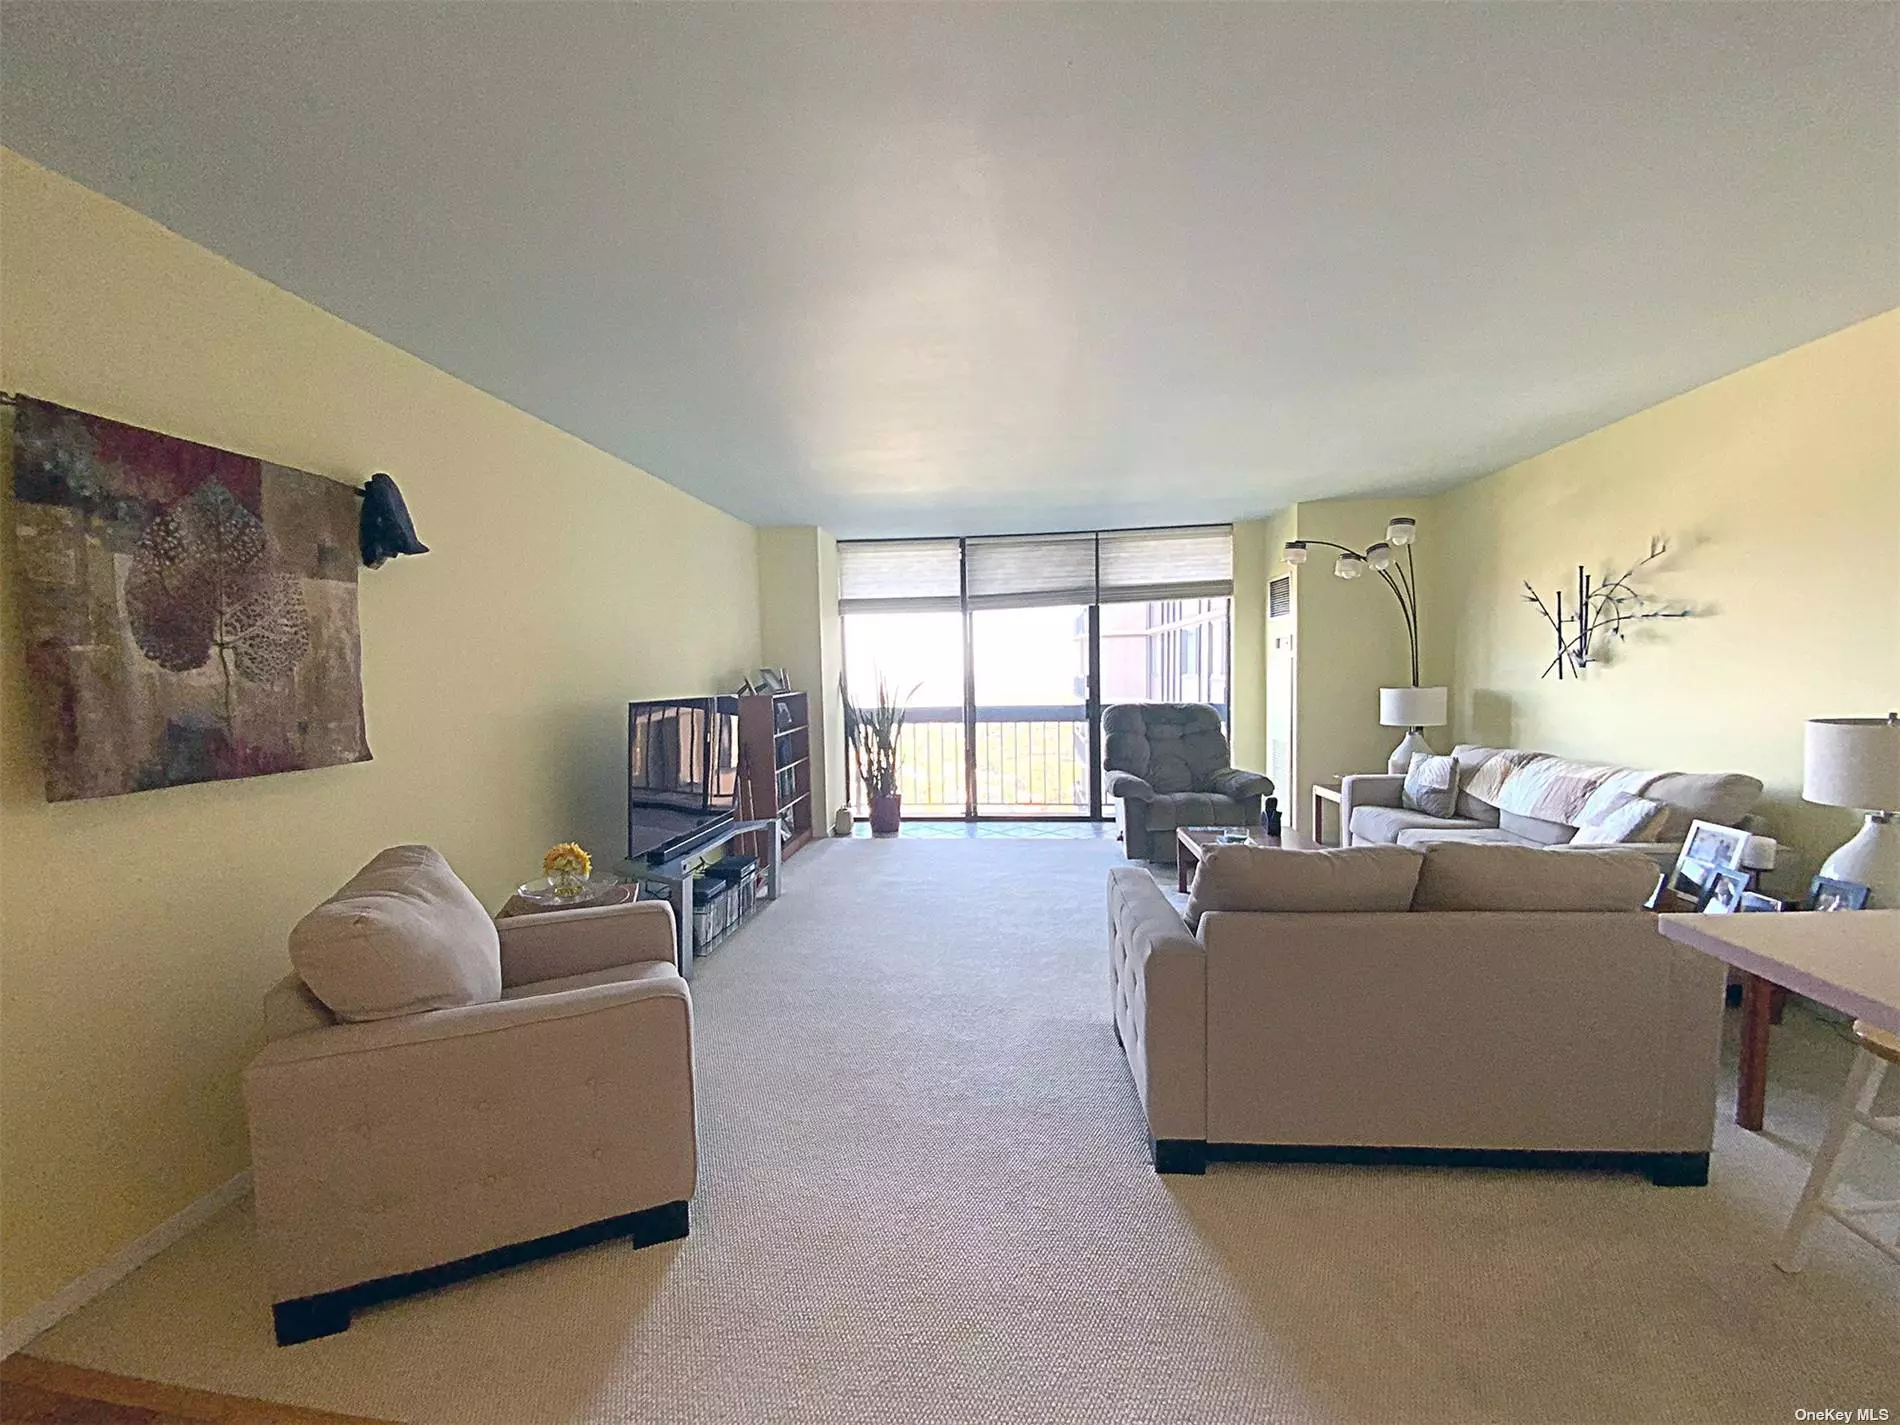 Brand New 1 Bedroom ! Overlooking the golf course from your balcony! Large living room with dining foyer, open kitchen with washer and dryer. Sunny bedroom with great closets. Renovated bathroom. A must see!!!